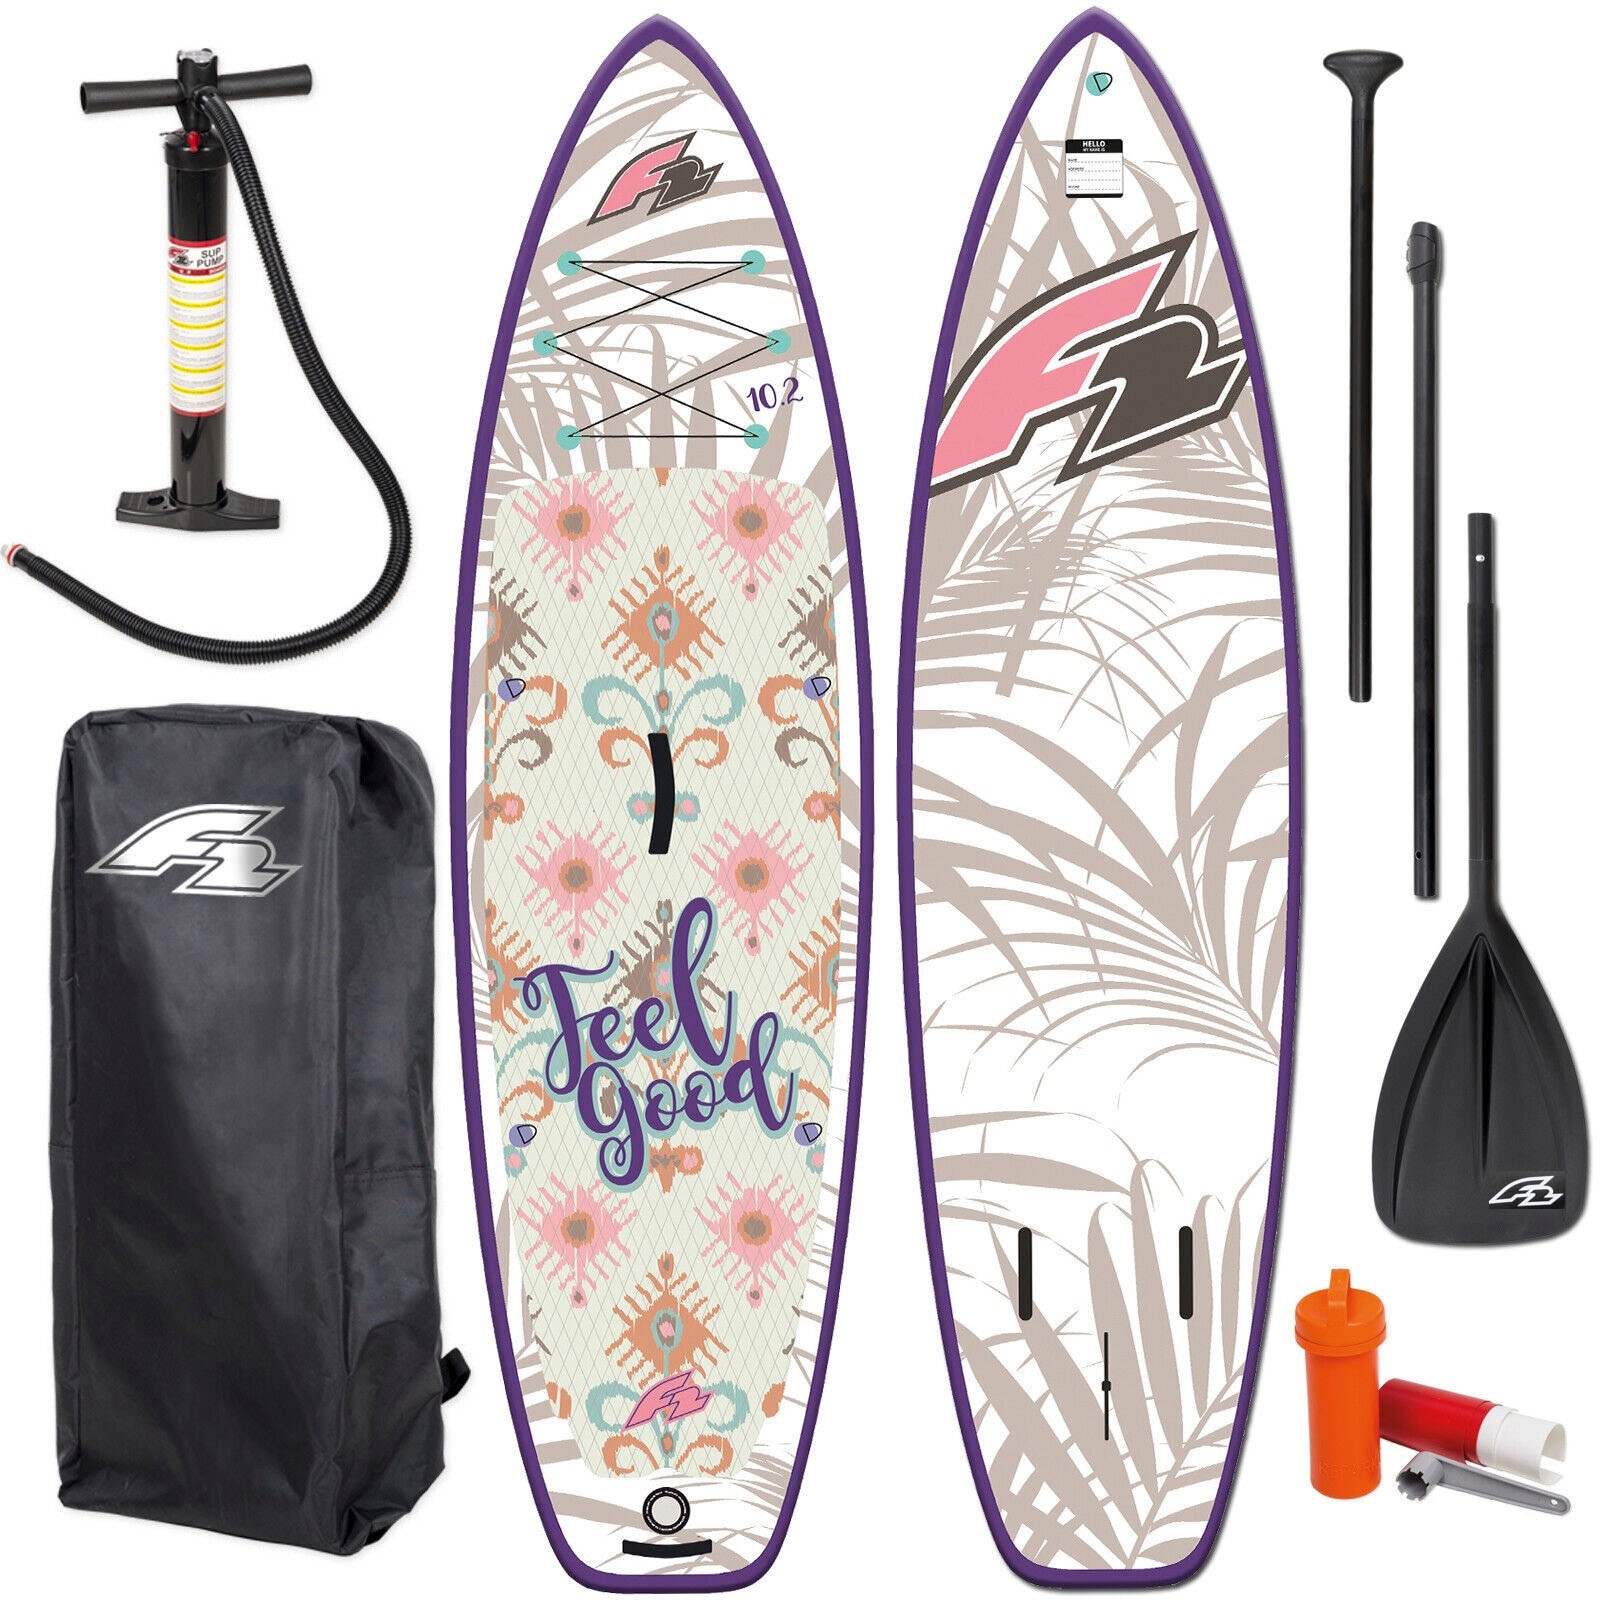 F2 Inflatable SUP-Board »Feelgood online tlg.) 5 OTTO 10,2 bei rosé«, (Packung, woman kaufen